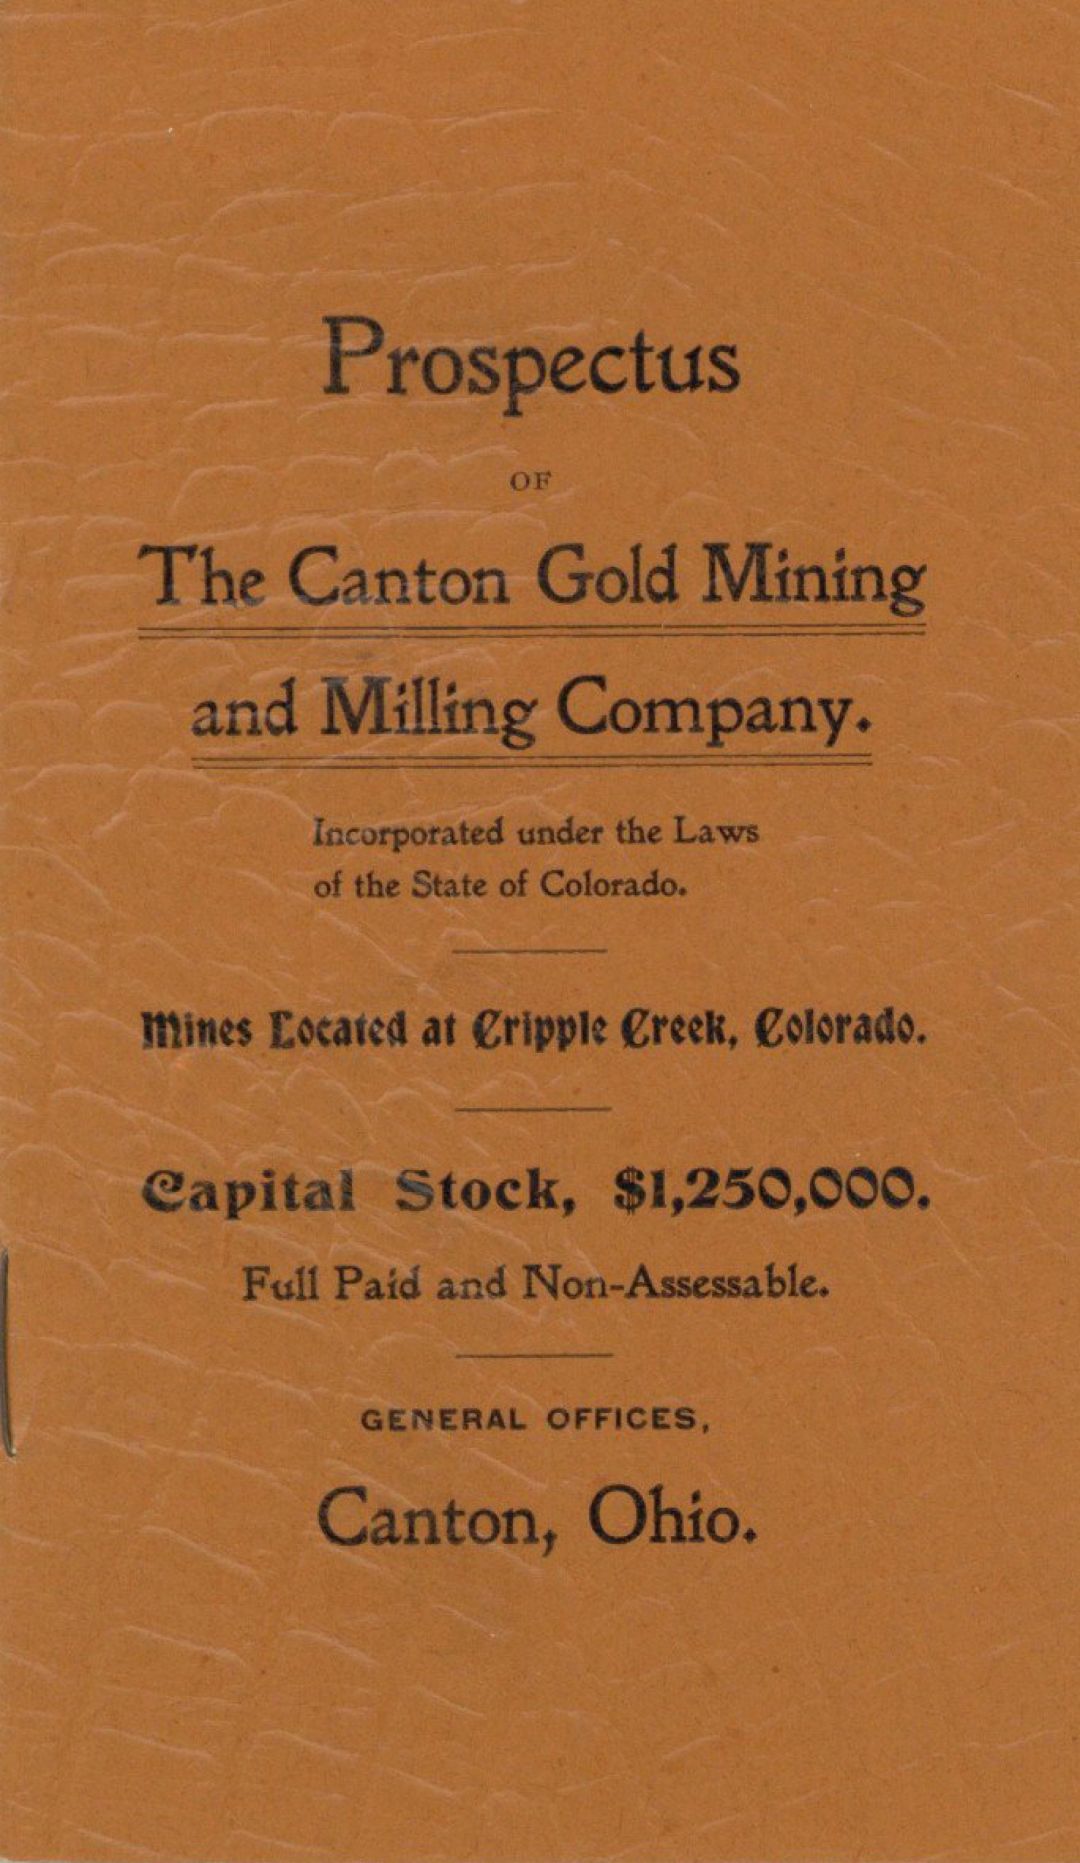 Prospectus for Canton Gold Mining and Milling Co. - Cripple Creek Mining District - Americana